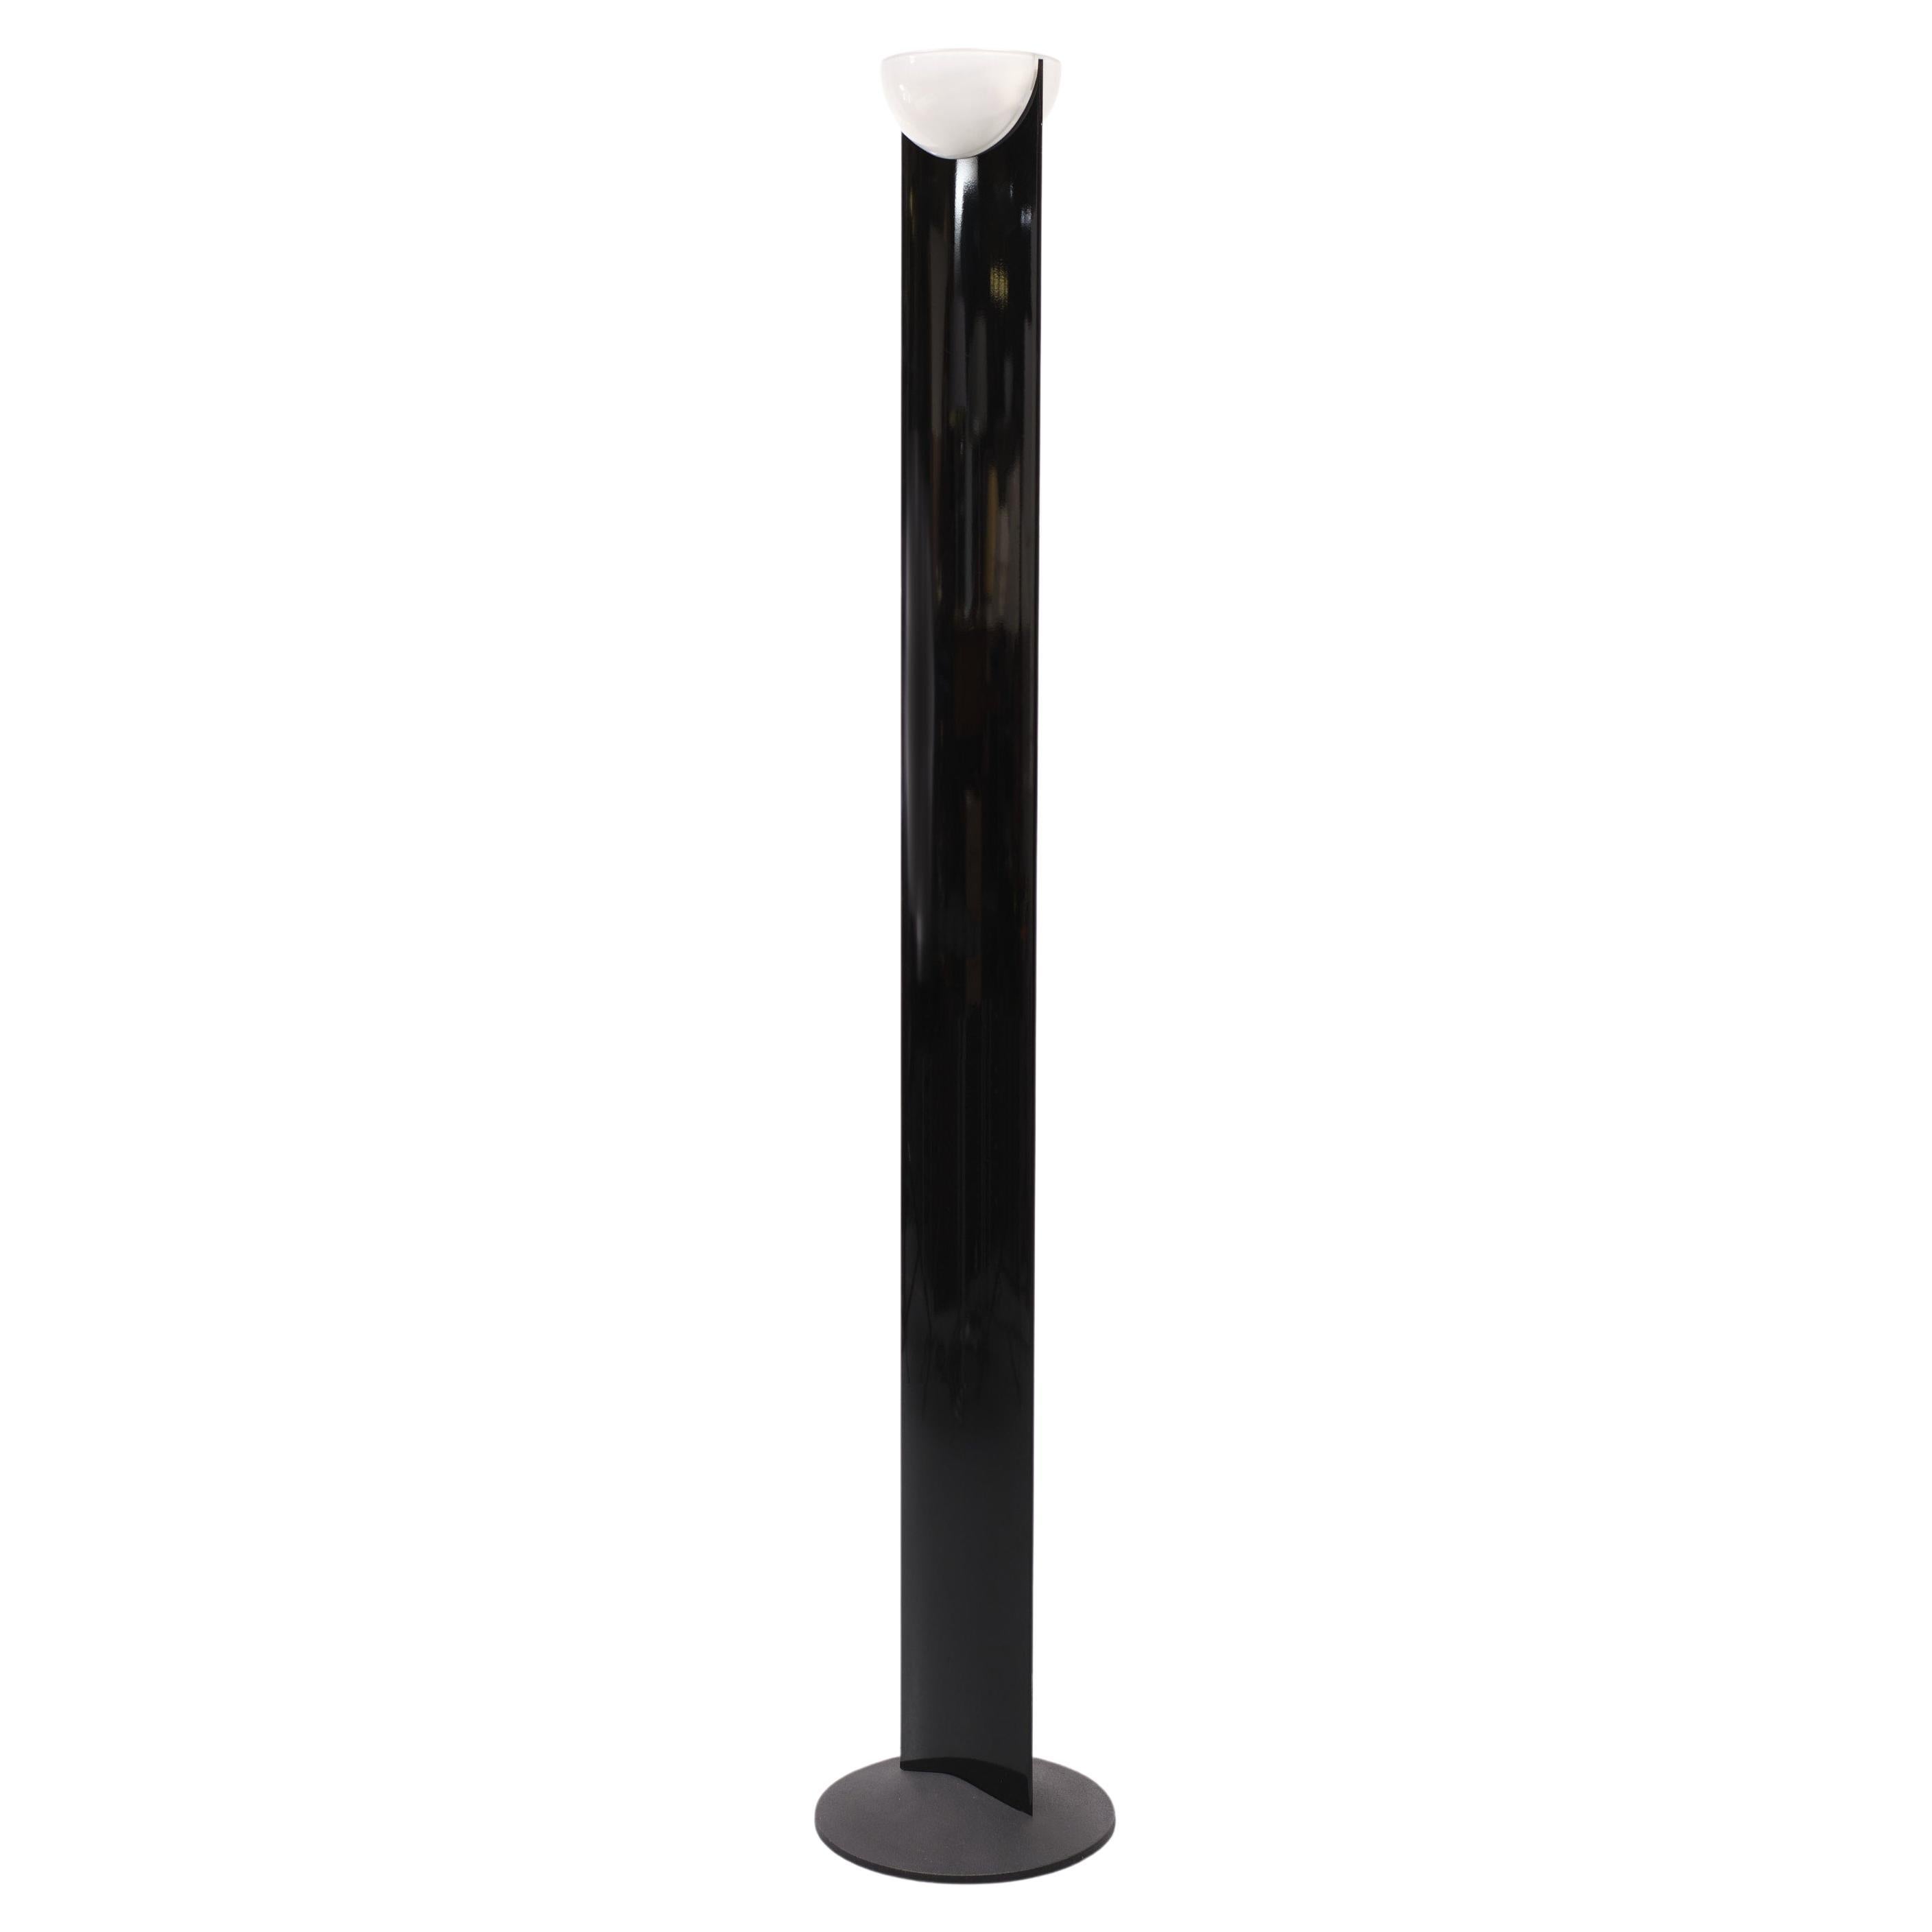 Superb Adonis halogen floor lamp by Gianfranco Frattini for Italian manufacturer Luci Italia in the 1980s . Murano frosted glass bowl form shade enclosing a conforming pierced metal light damper, on an elliptical glossy black laquered steel